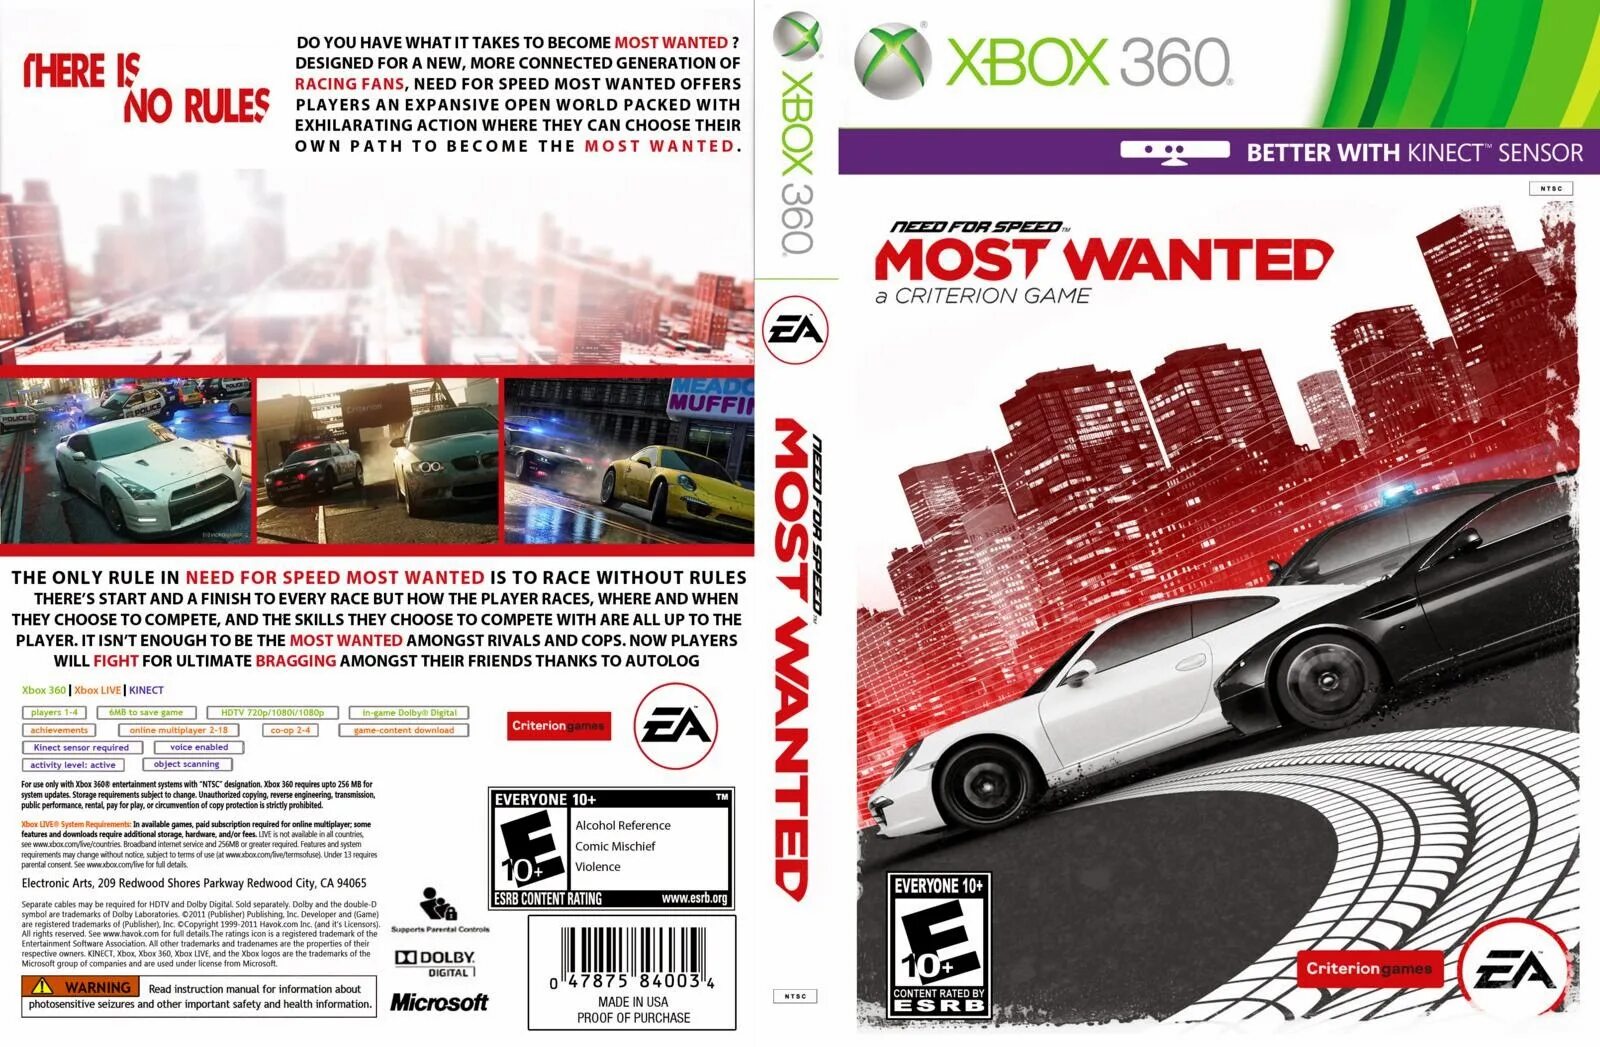 Need for Speed most wanted 2012 Xbox 360. Need for Speed most wanted Xbox 360 обложка. Need for Speed most wanted Xbox 360 диск. NFS MW 2012 Xbox 360. Nfs most wanted xbox